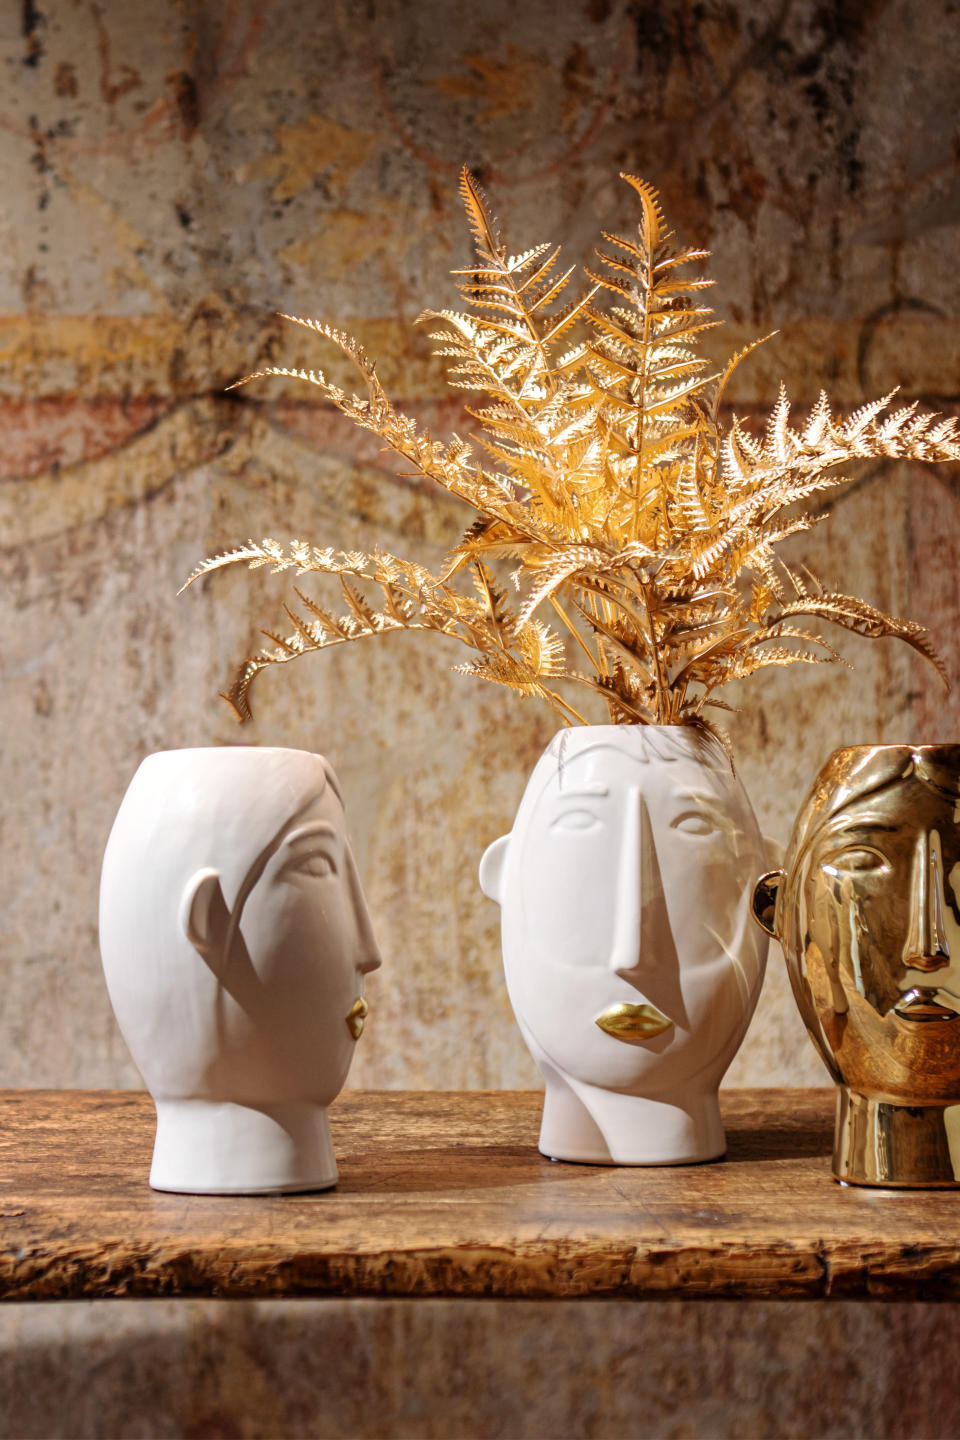 Face-shaped vases by Rituali Domestici. - Credit: Courtesy of Lenet Group